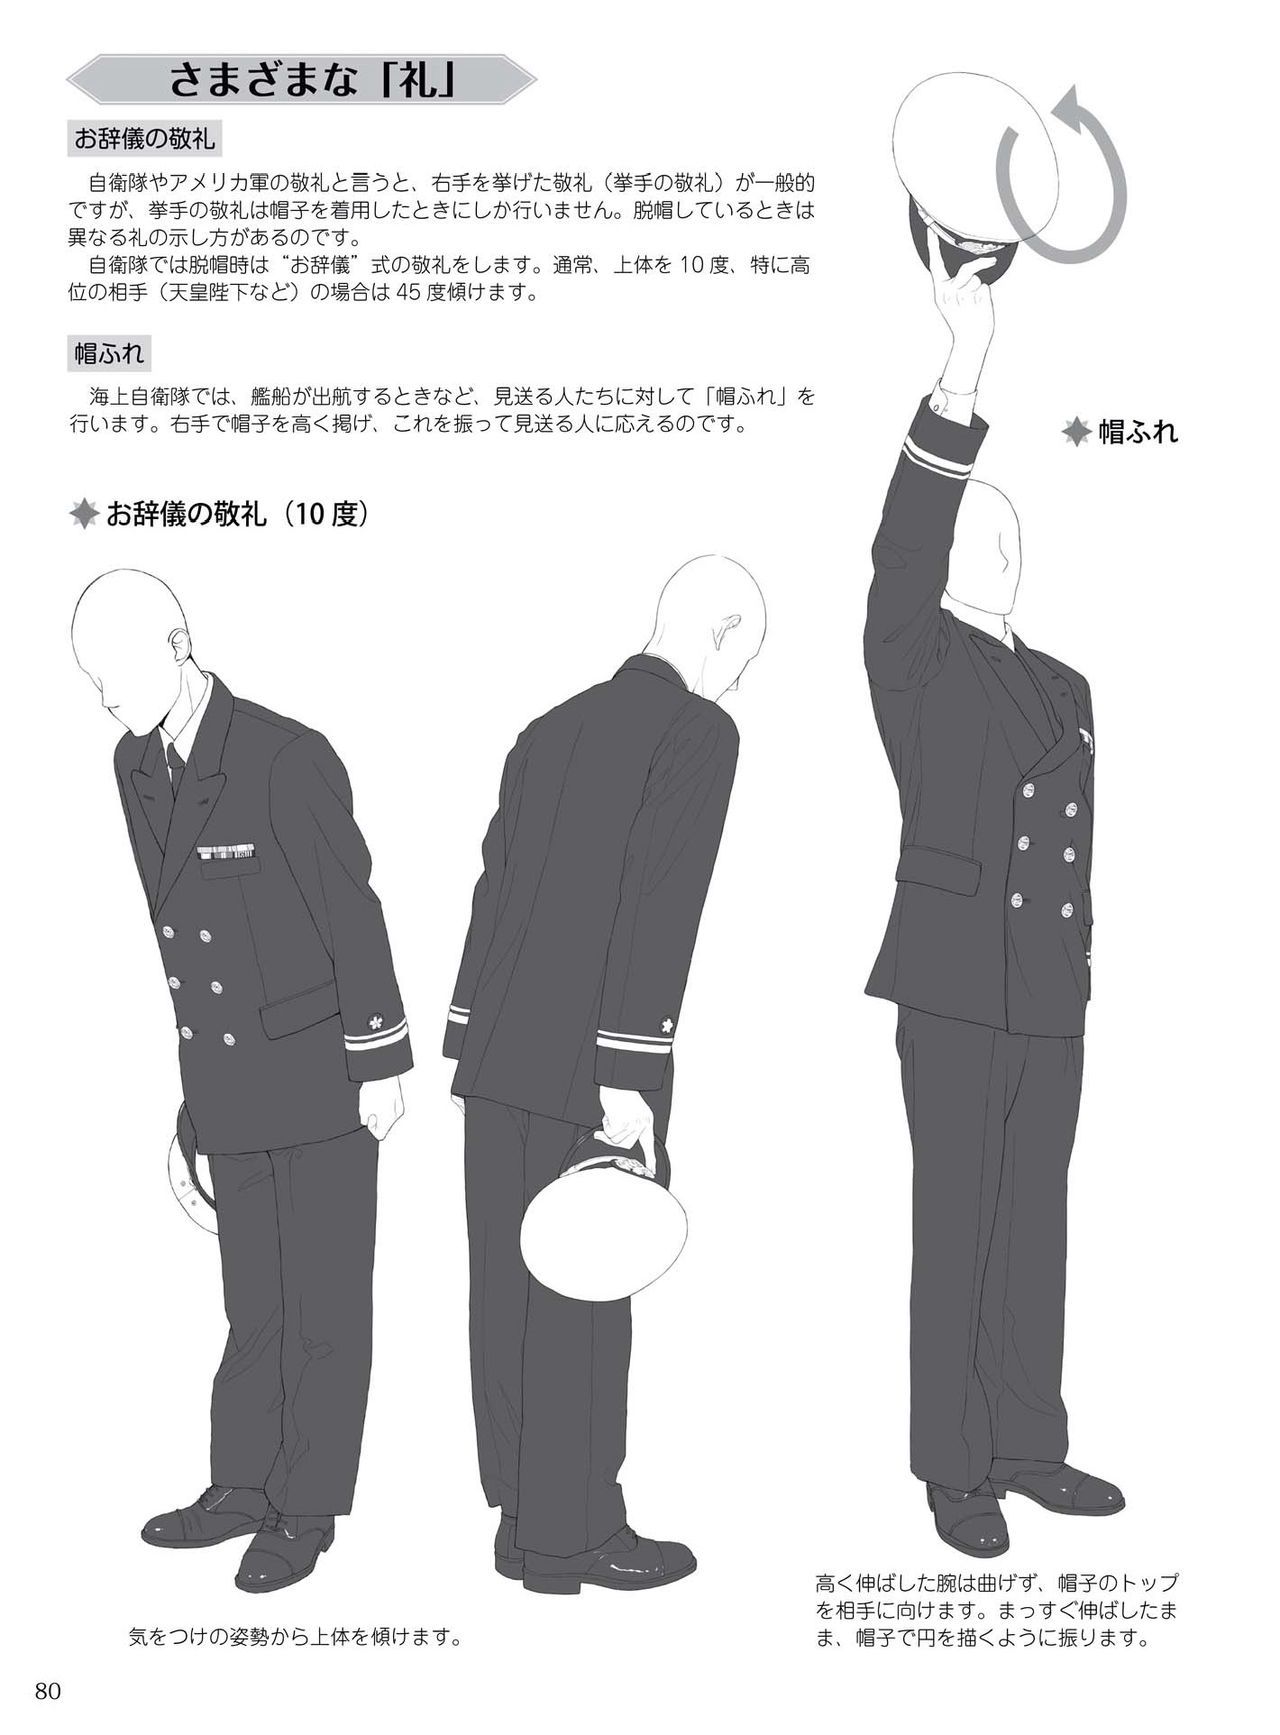 How to draw military uniforms and uniforms From Self-Defense Forces 軍服・制服の描き方 アメリカ軍・自衛隊の制服から戦闘服まで 83